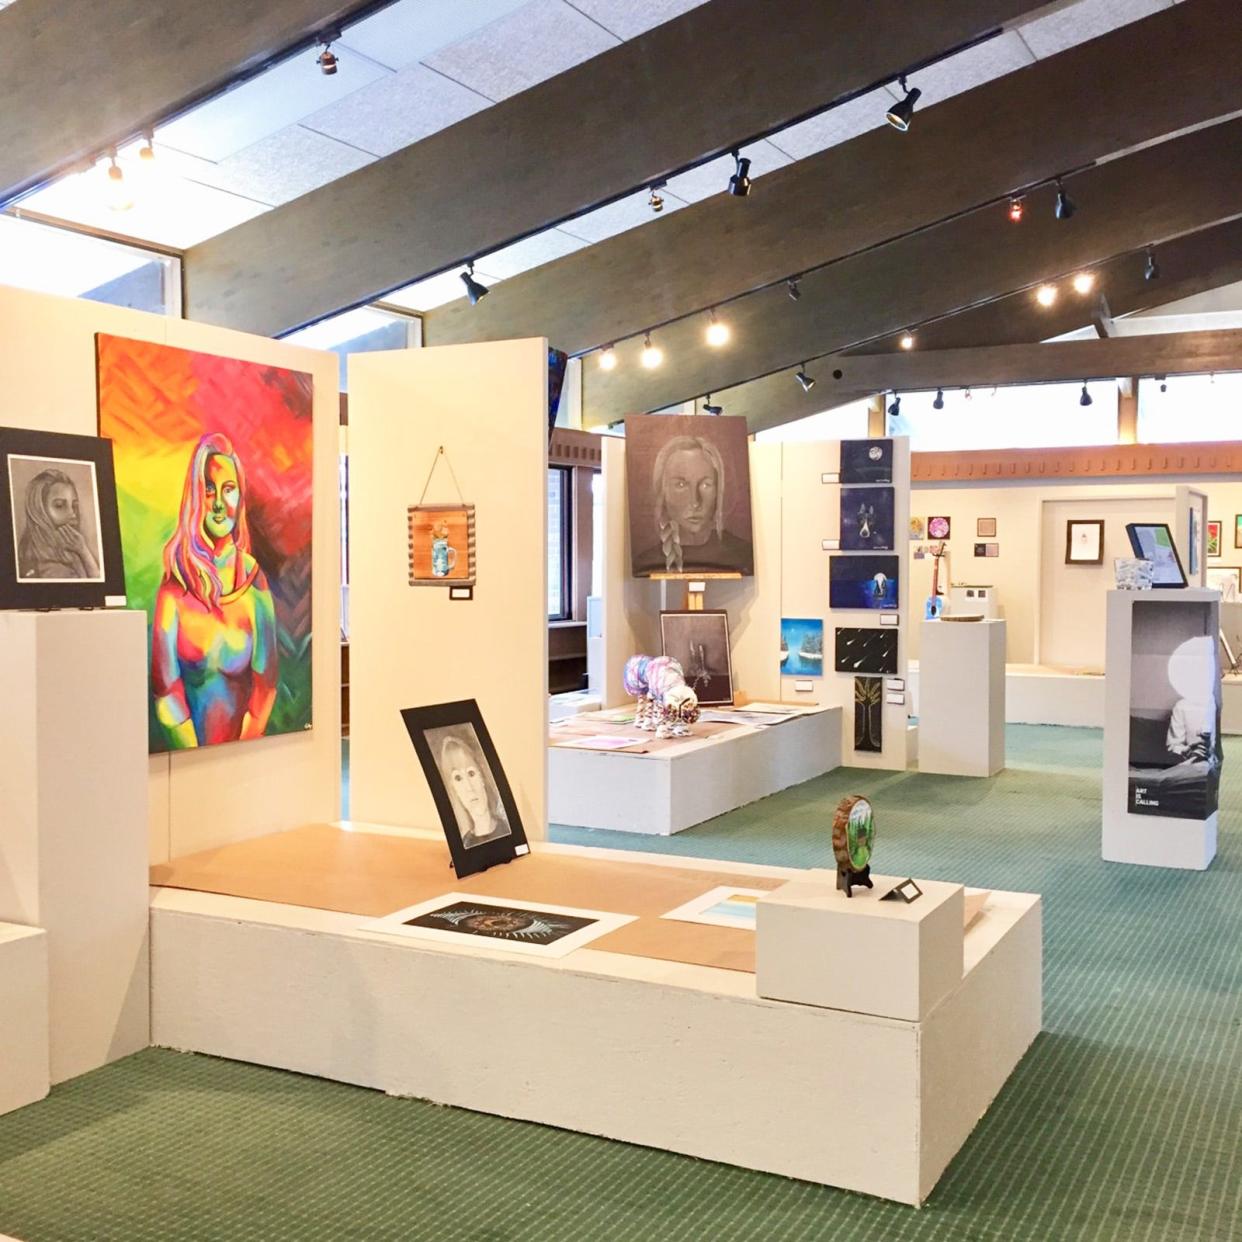 Artwork from area students will be on display at the Charlevoix Circle of Arts from Jan. 27 to Feb. 25 during the Spotlight on Innovation exhibit.